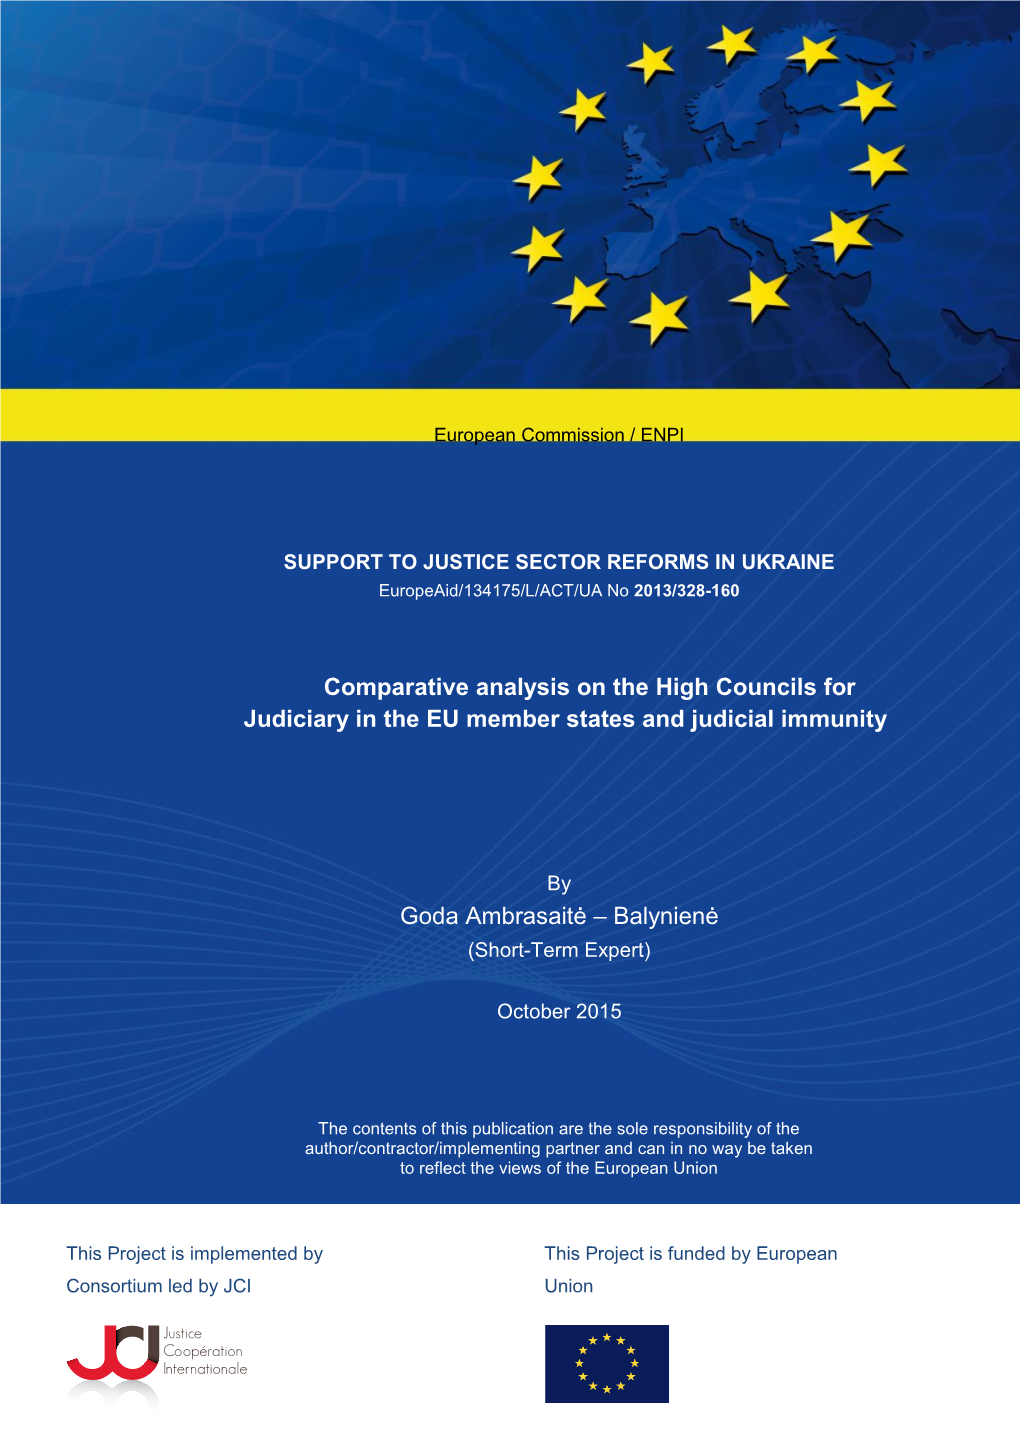 Comparative Analysis on the High Councils for Judiciary in the EU Member States and Judicial Immunity